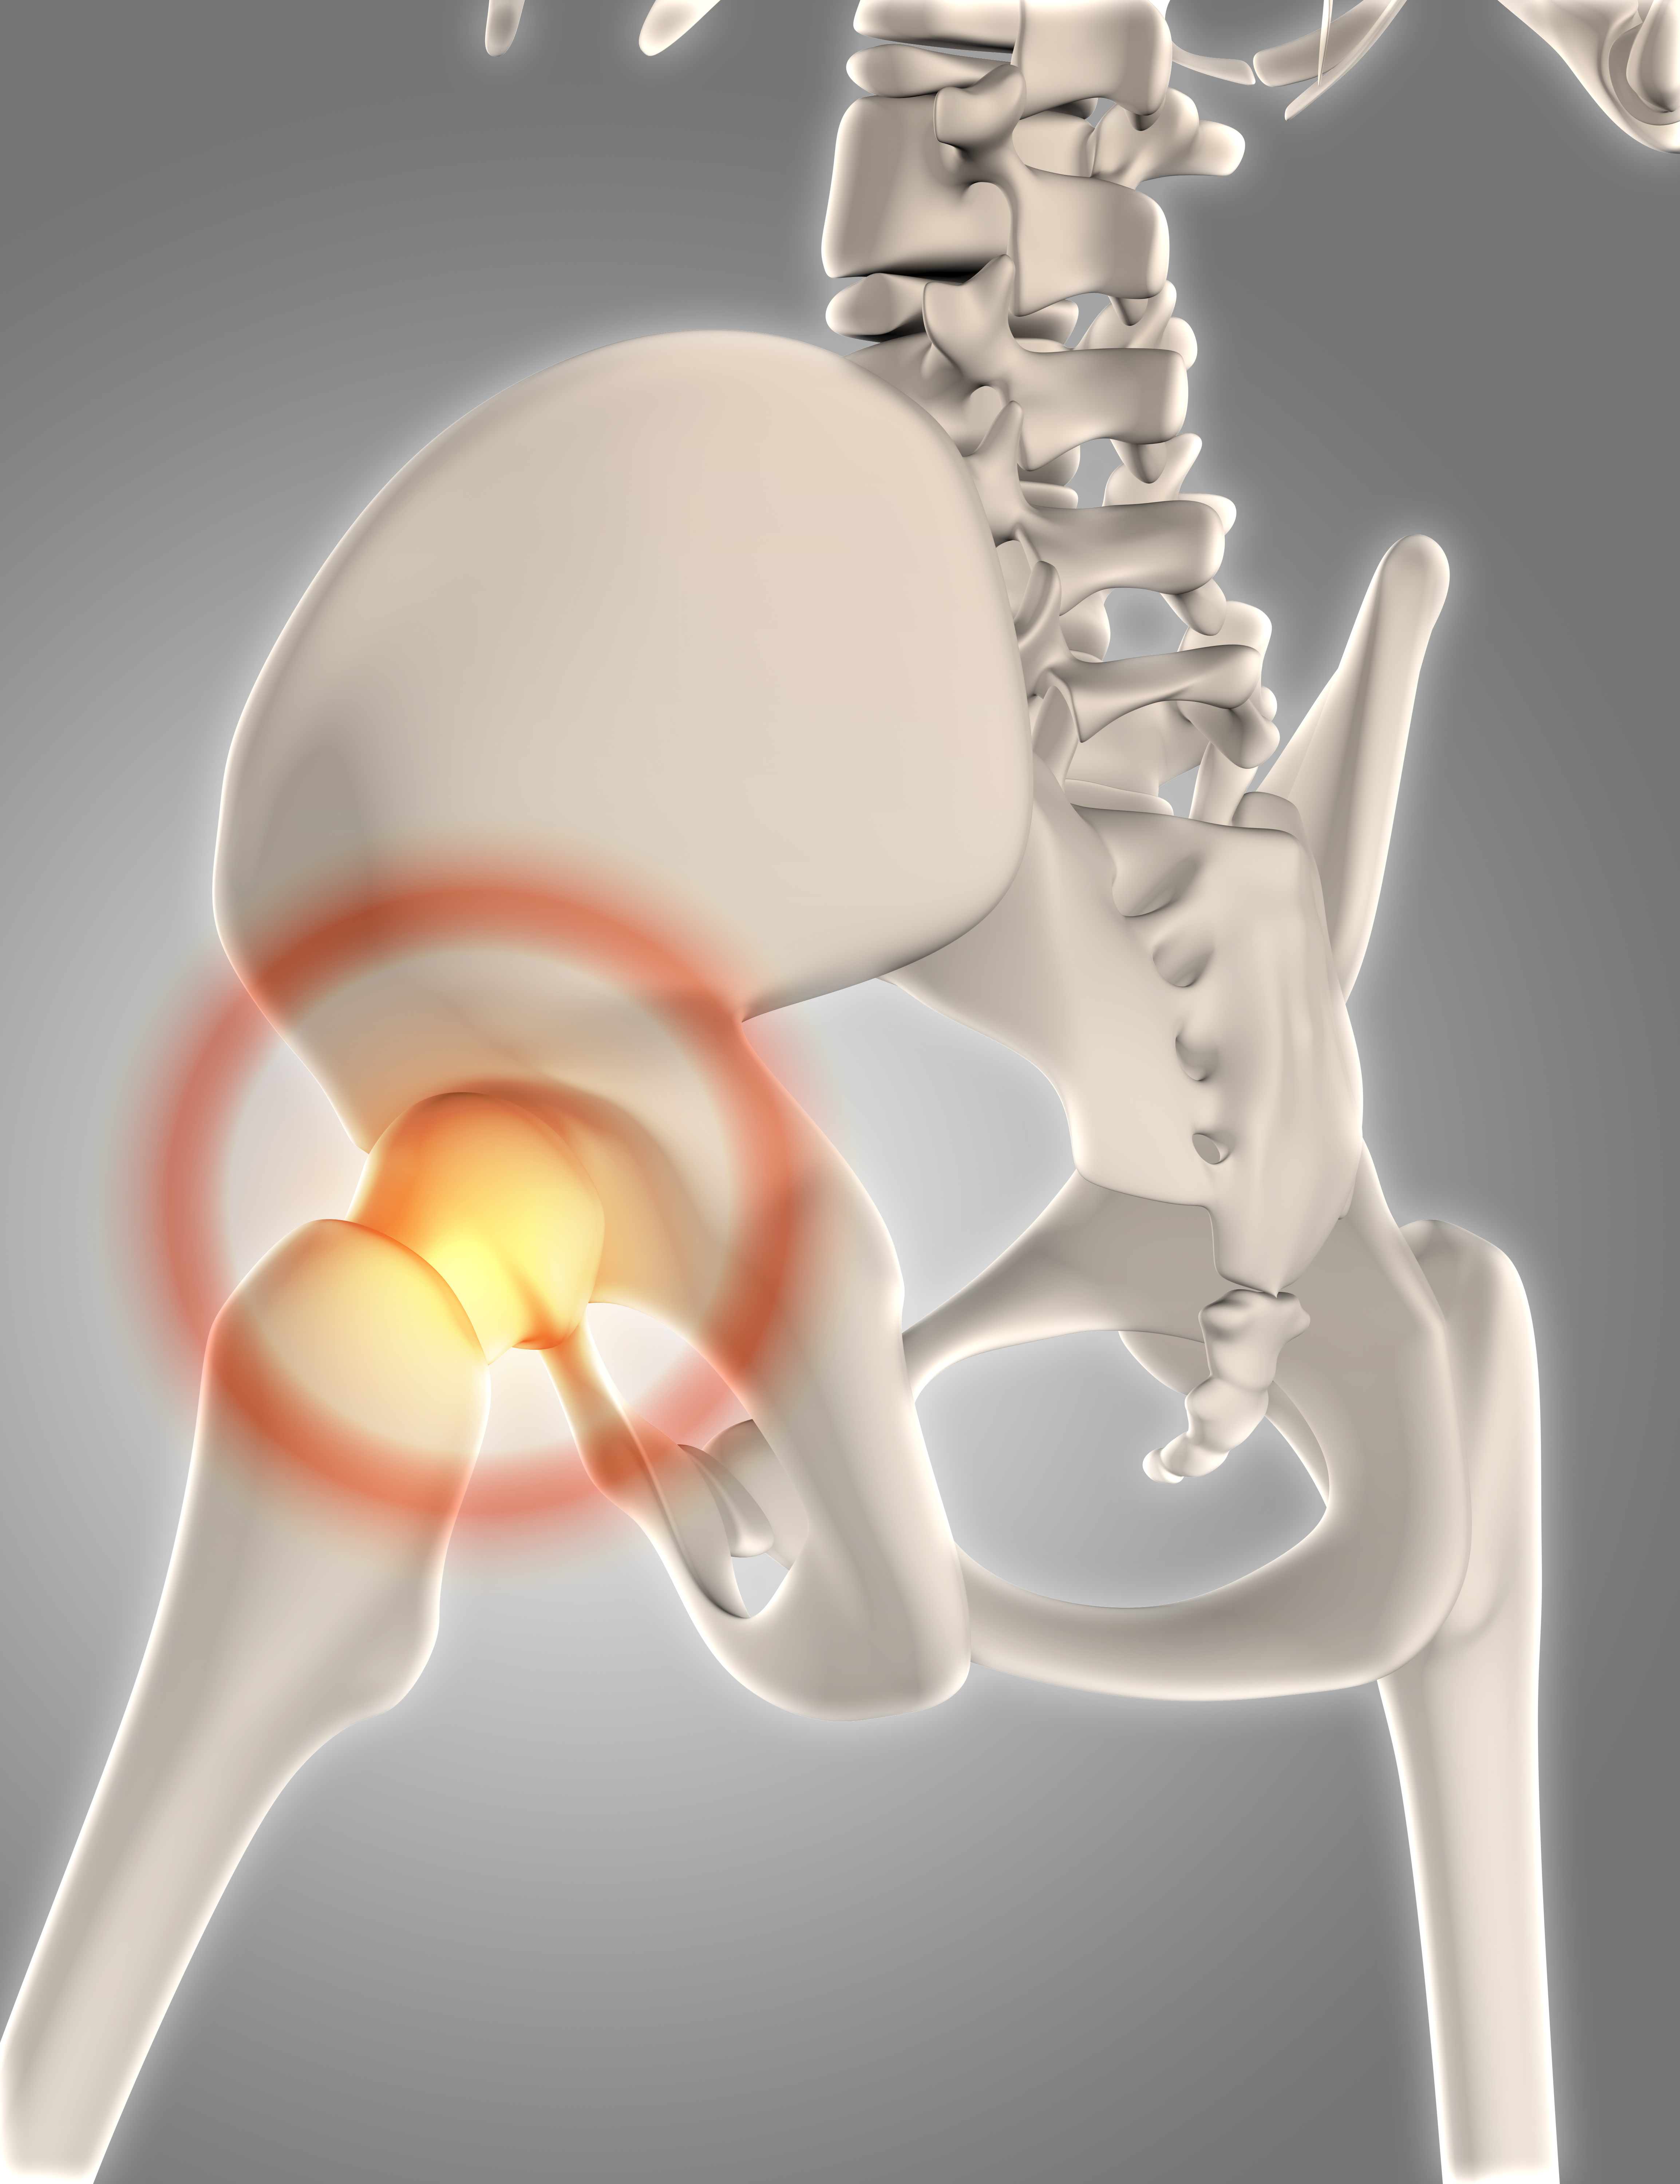 Hip Pain Relief, United States - OSR Physical Therapy